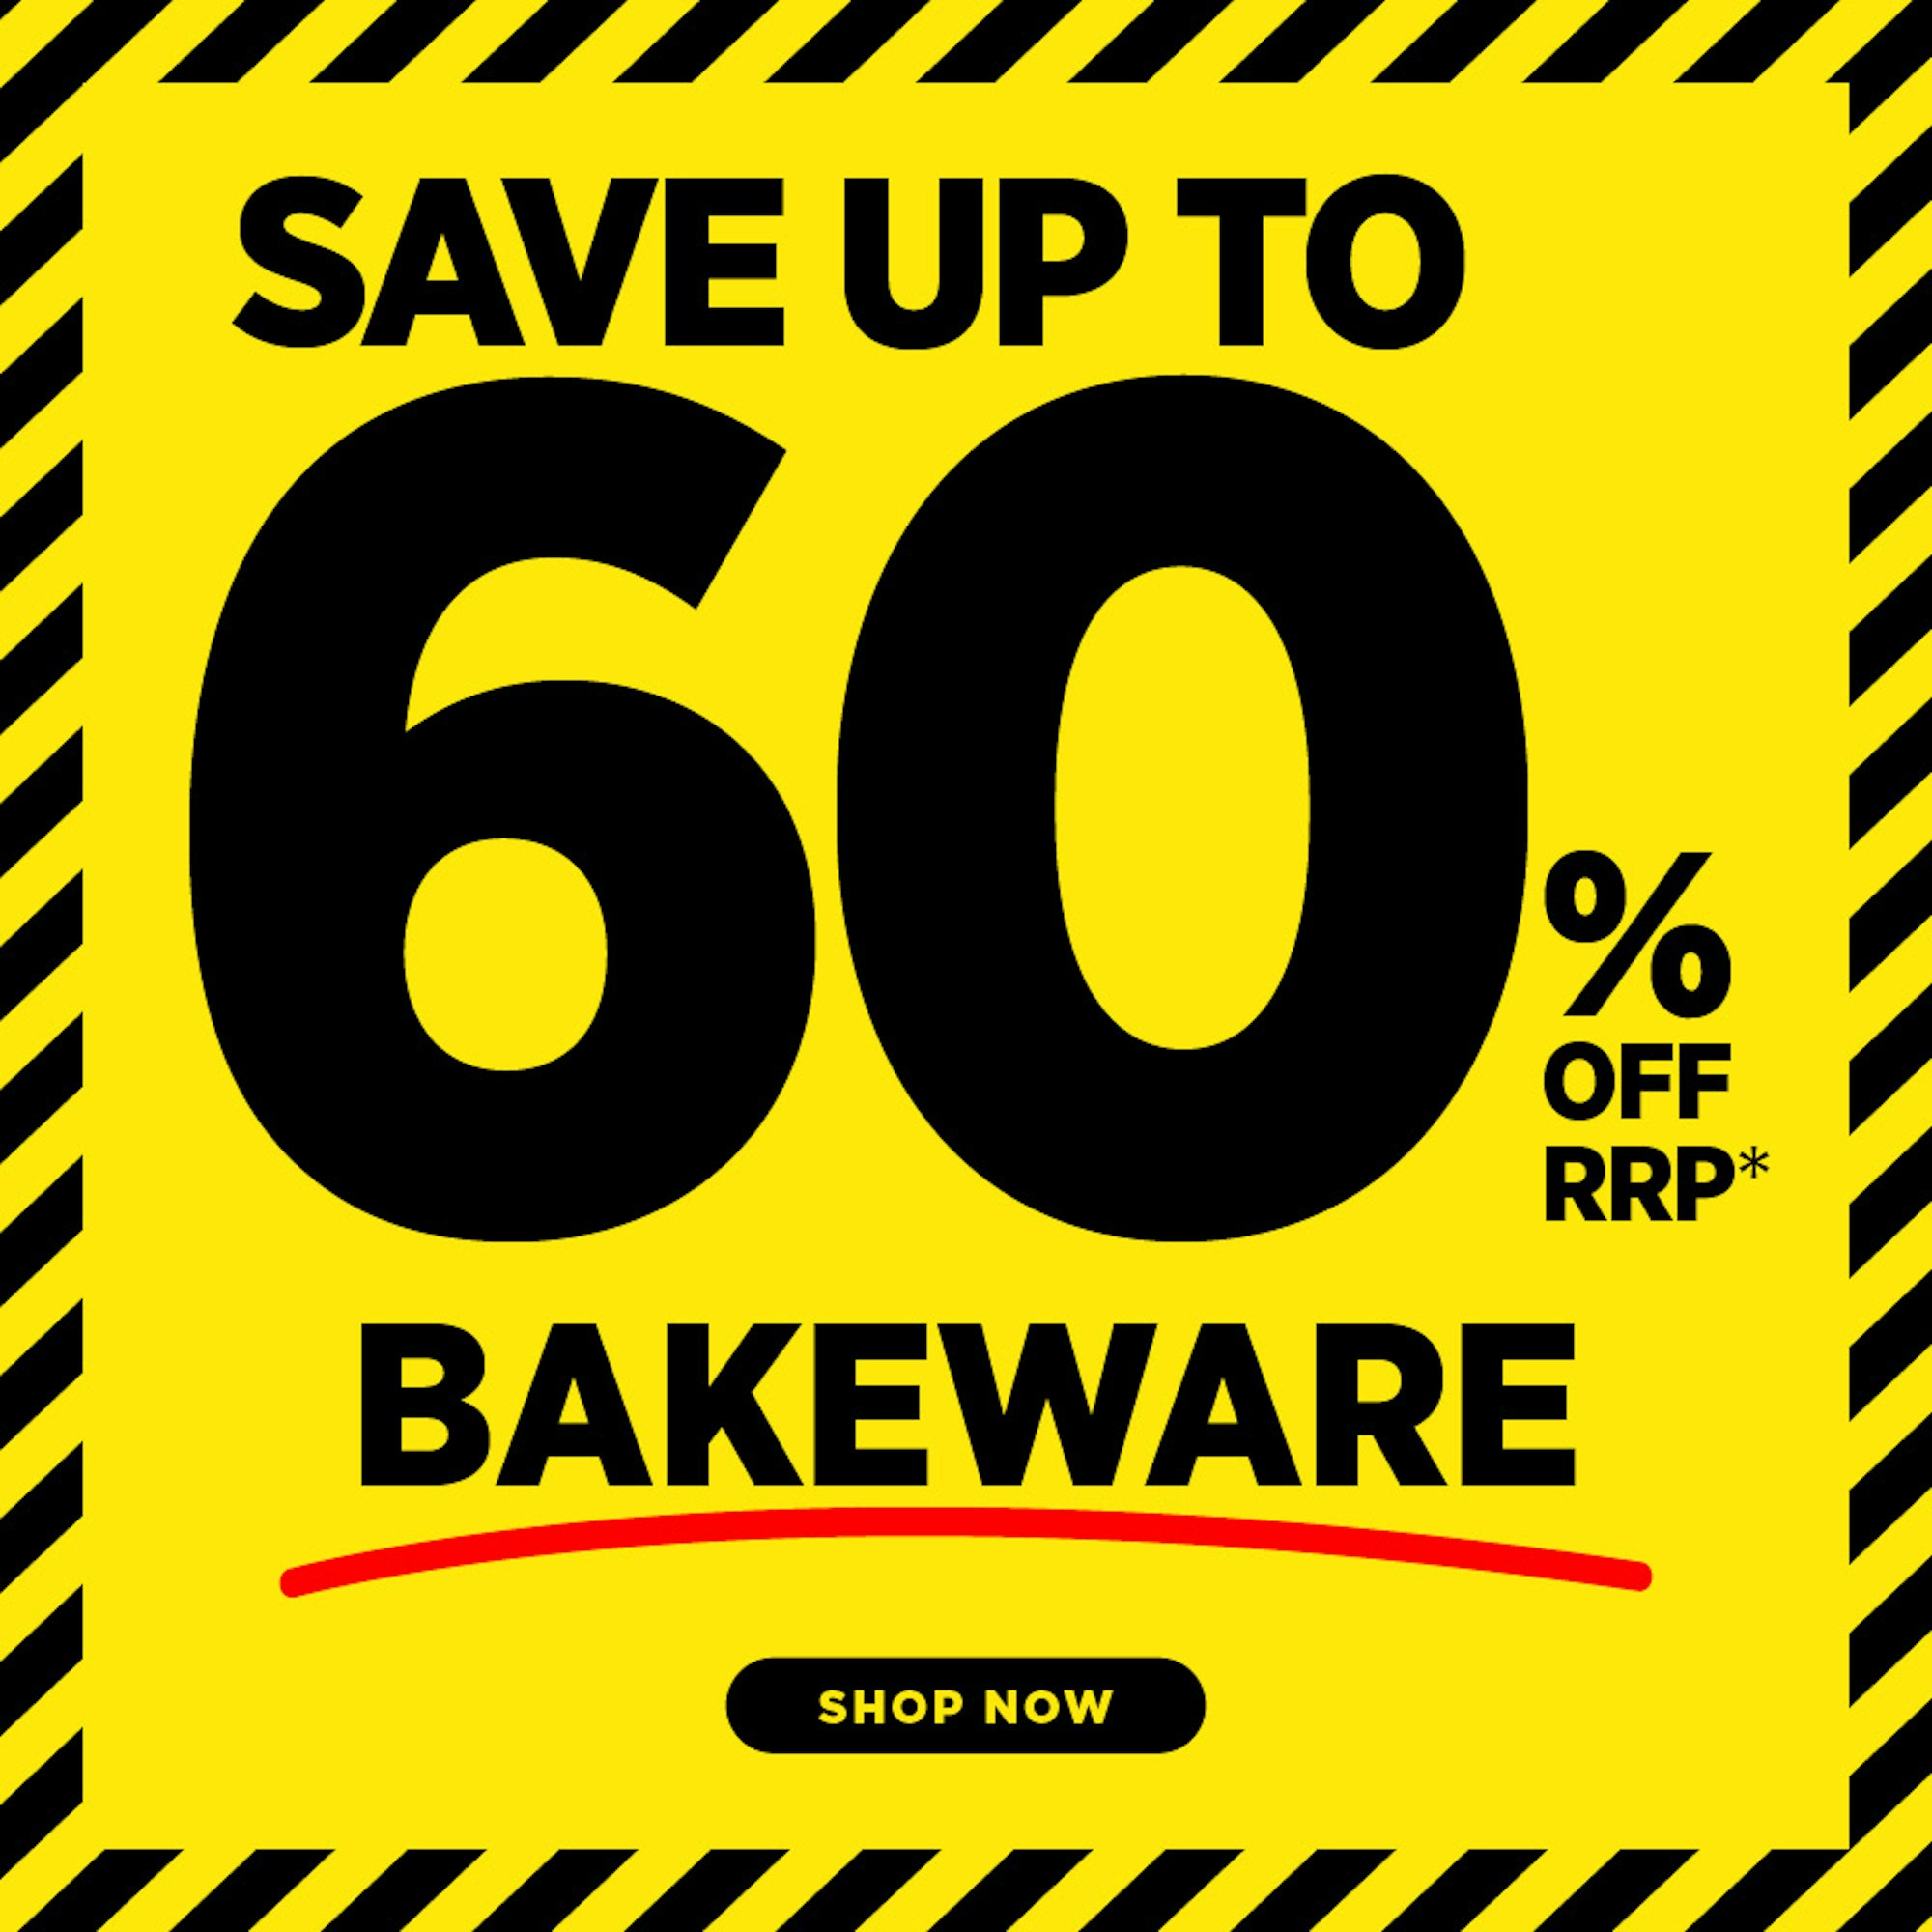 bakeware up to 60% off